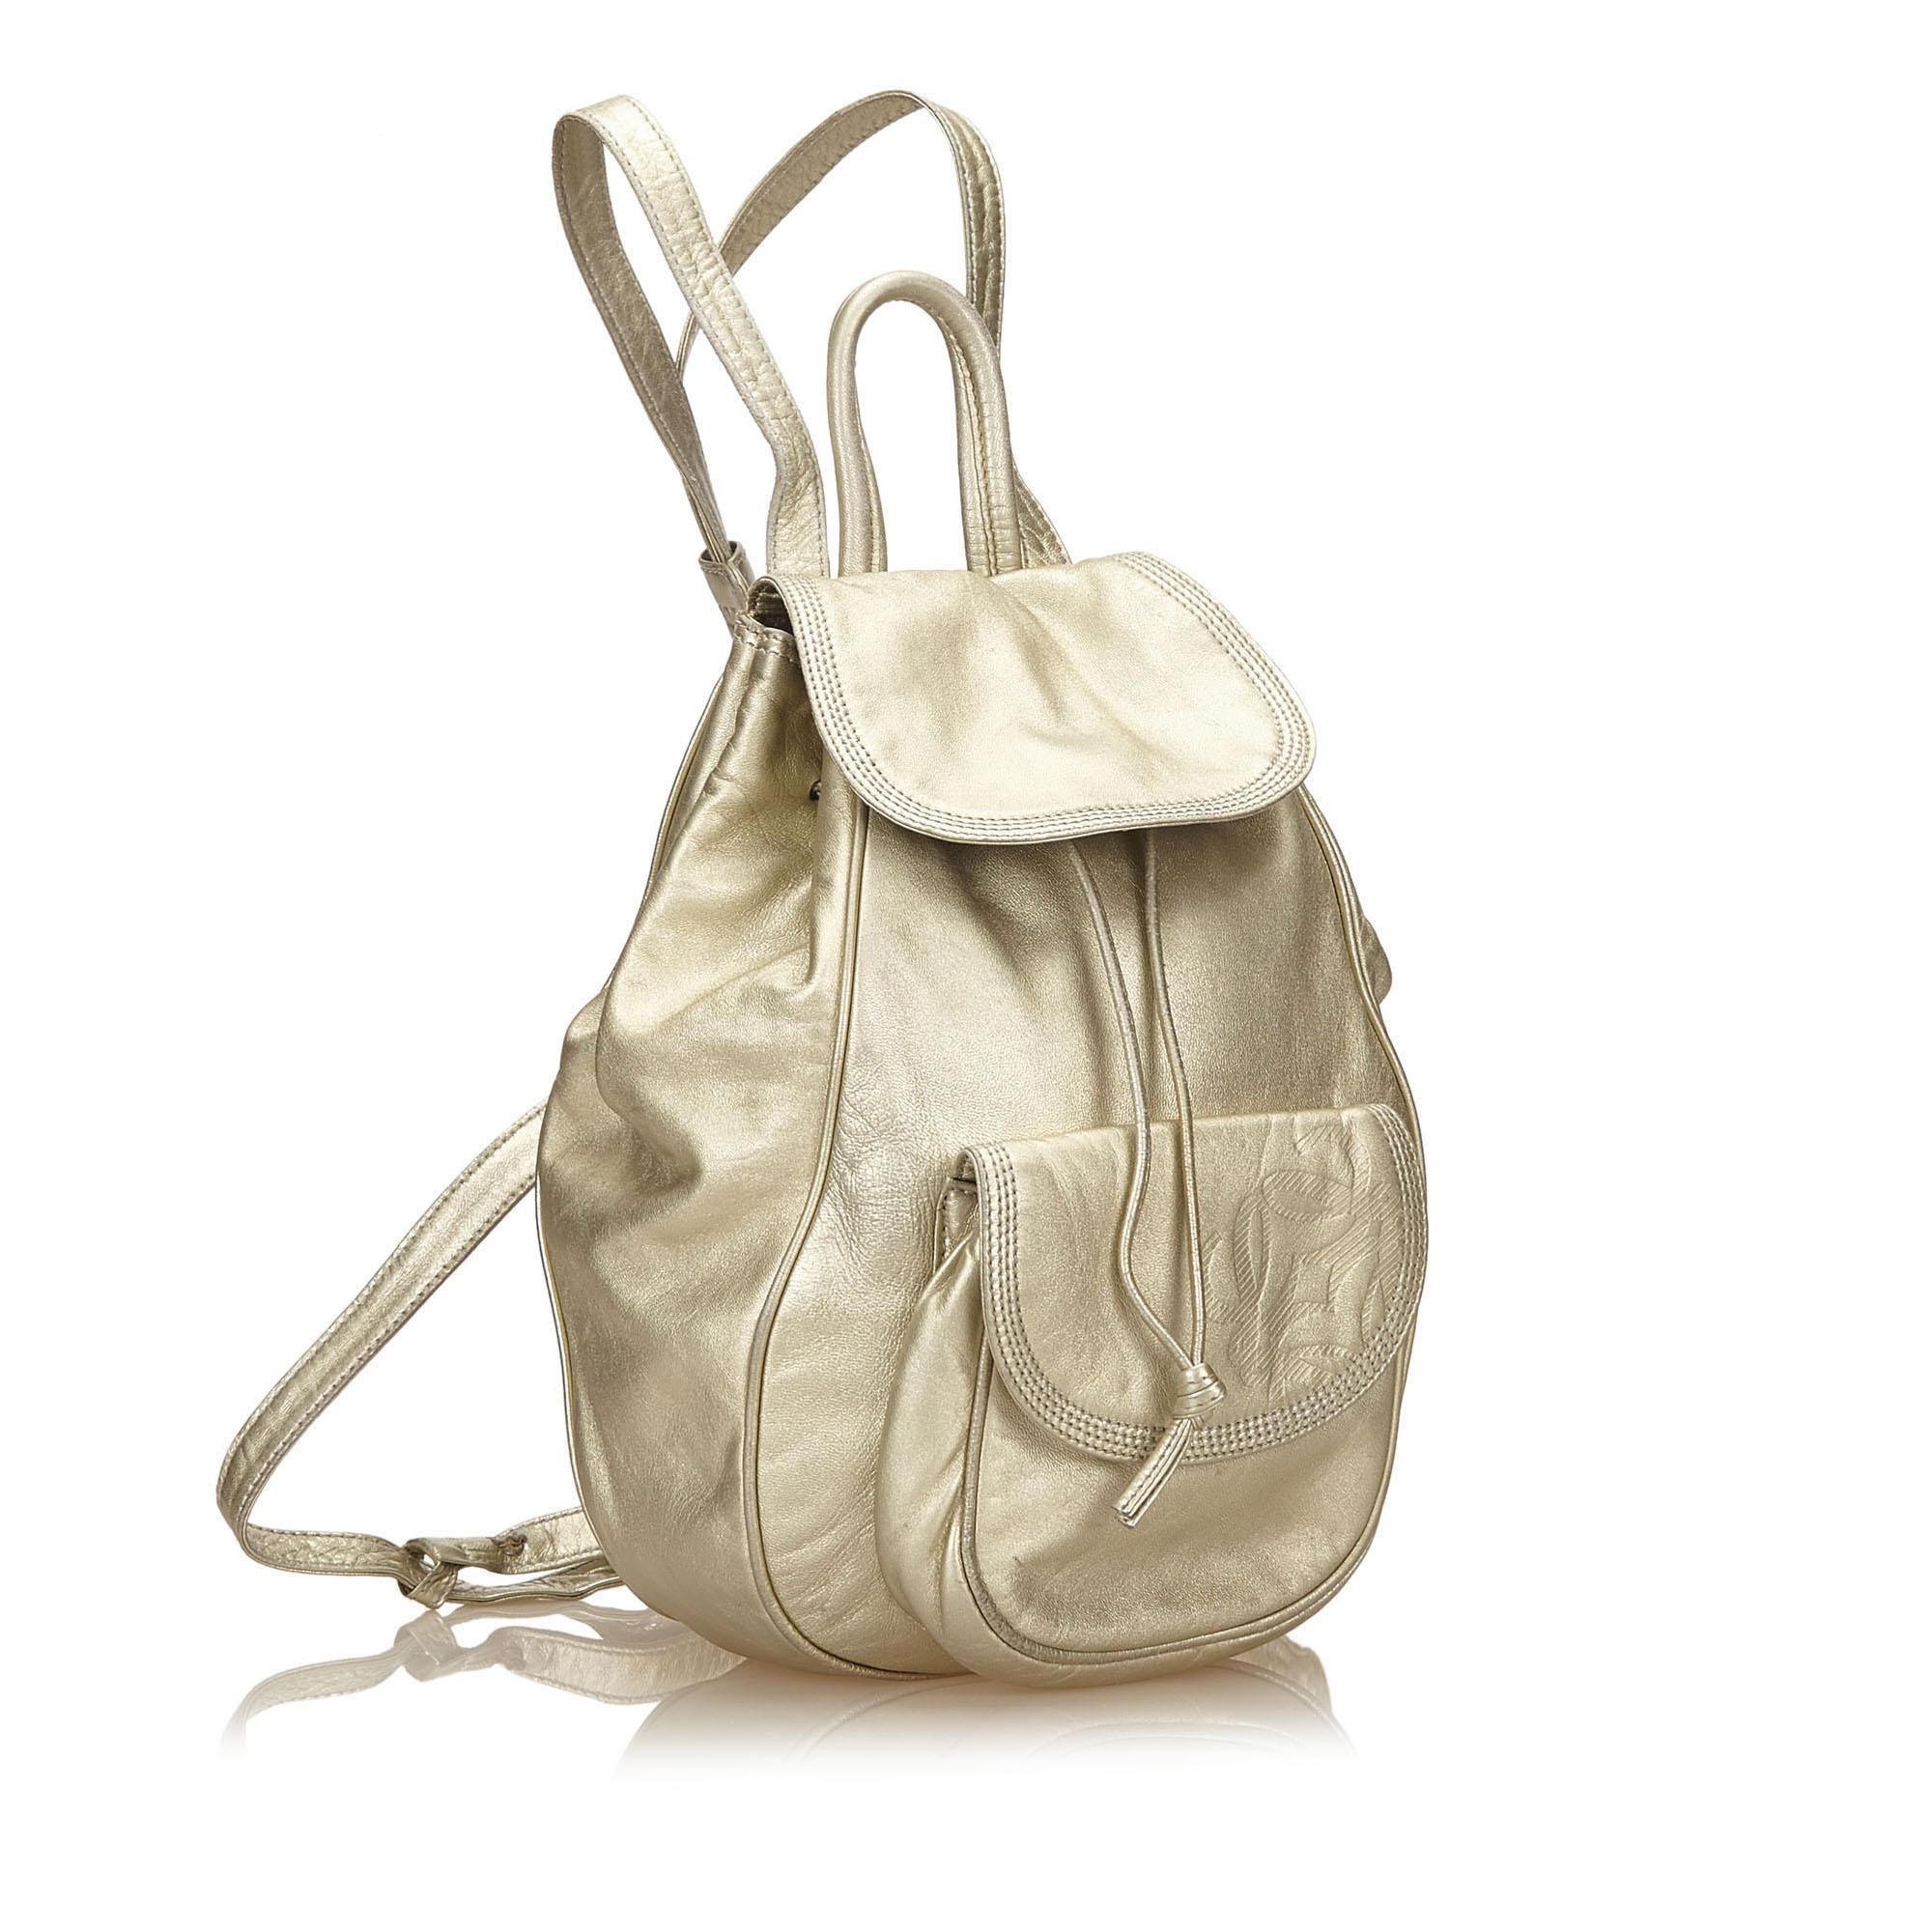 This backpack features a metallic leather body, exterior flap pocket, flat straps, flap top with drawstring closure, and interior zip and slip pocket. It carries as B+ condition rating.

Inclusions: 
This item does not come with